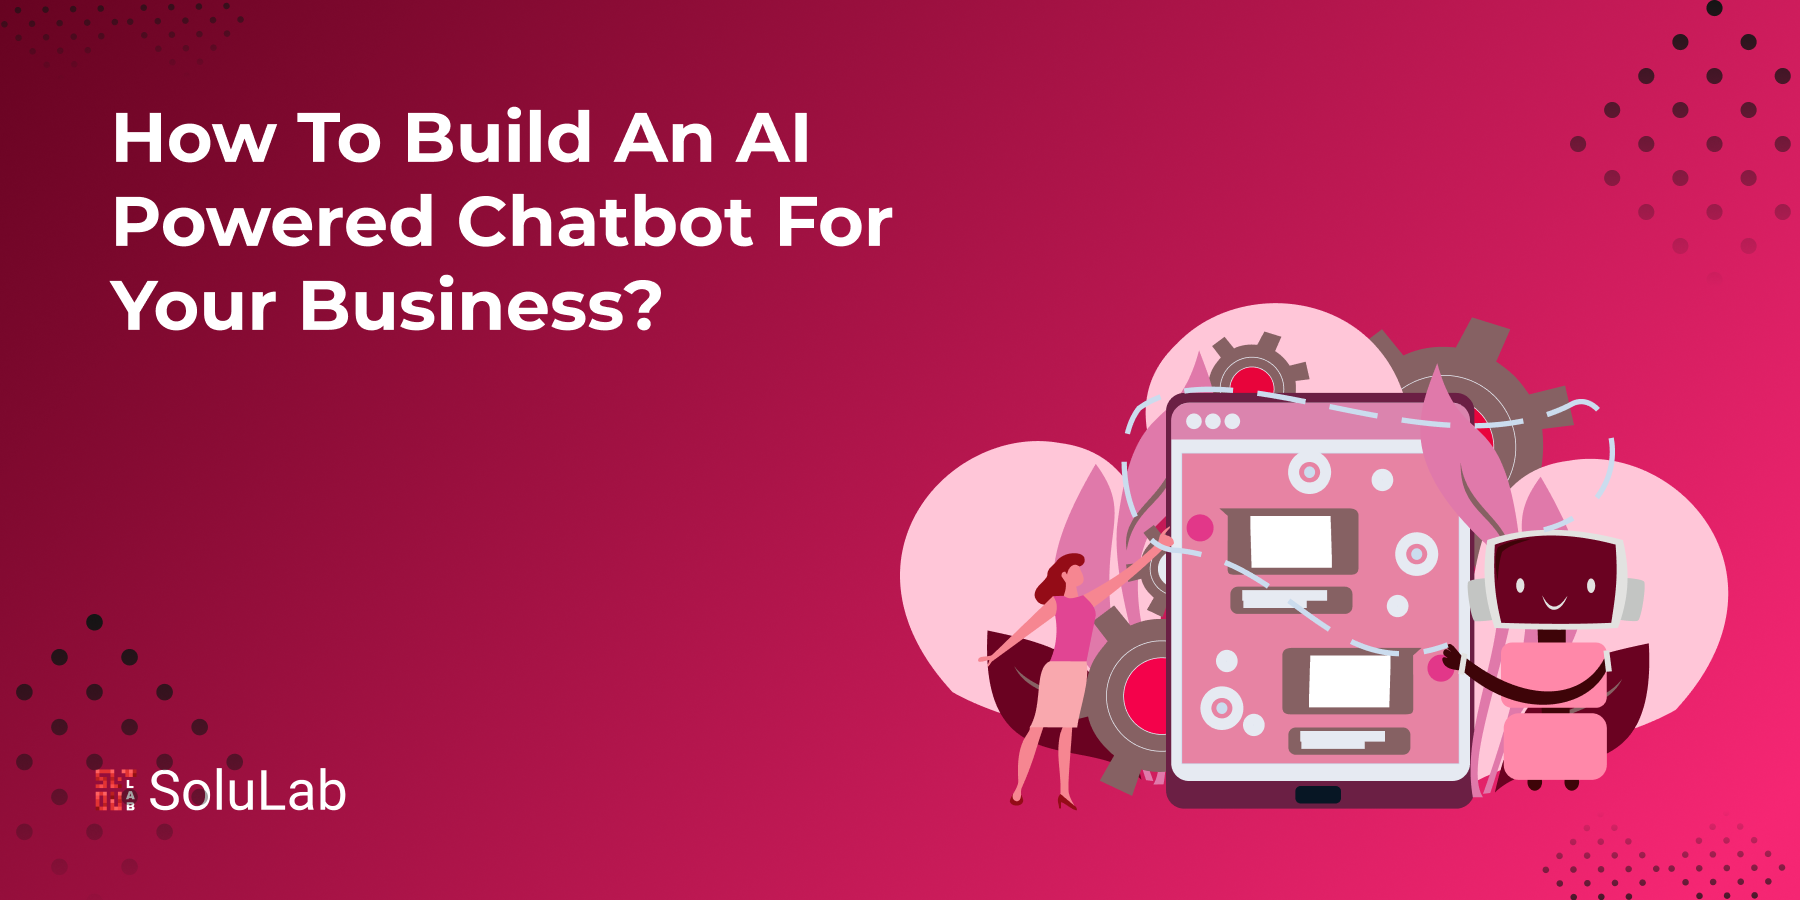 How to Build an AI-Powered Chatbot For Your Business?